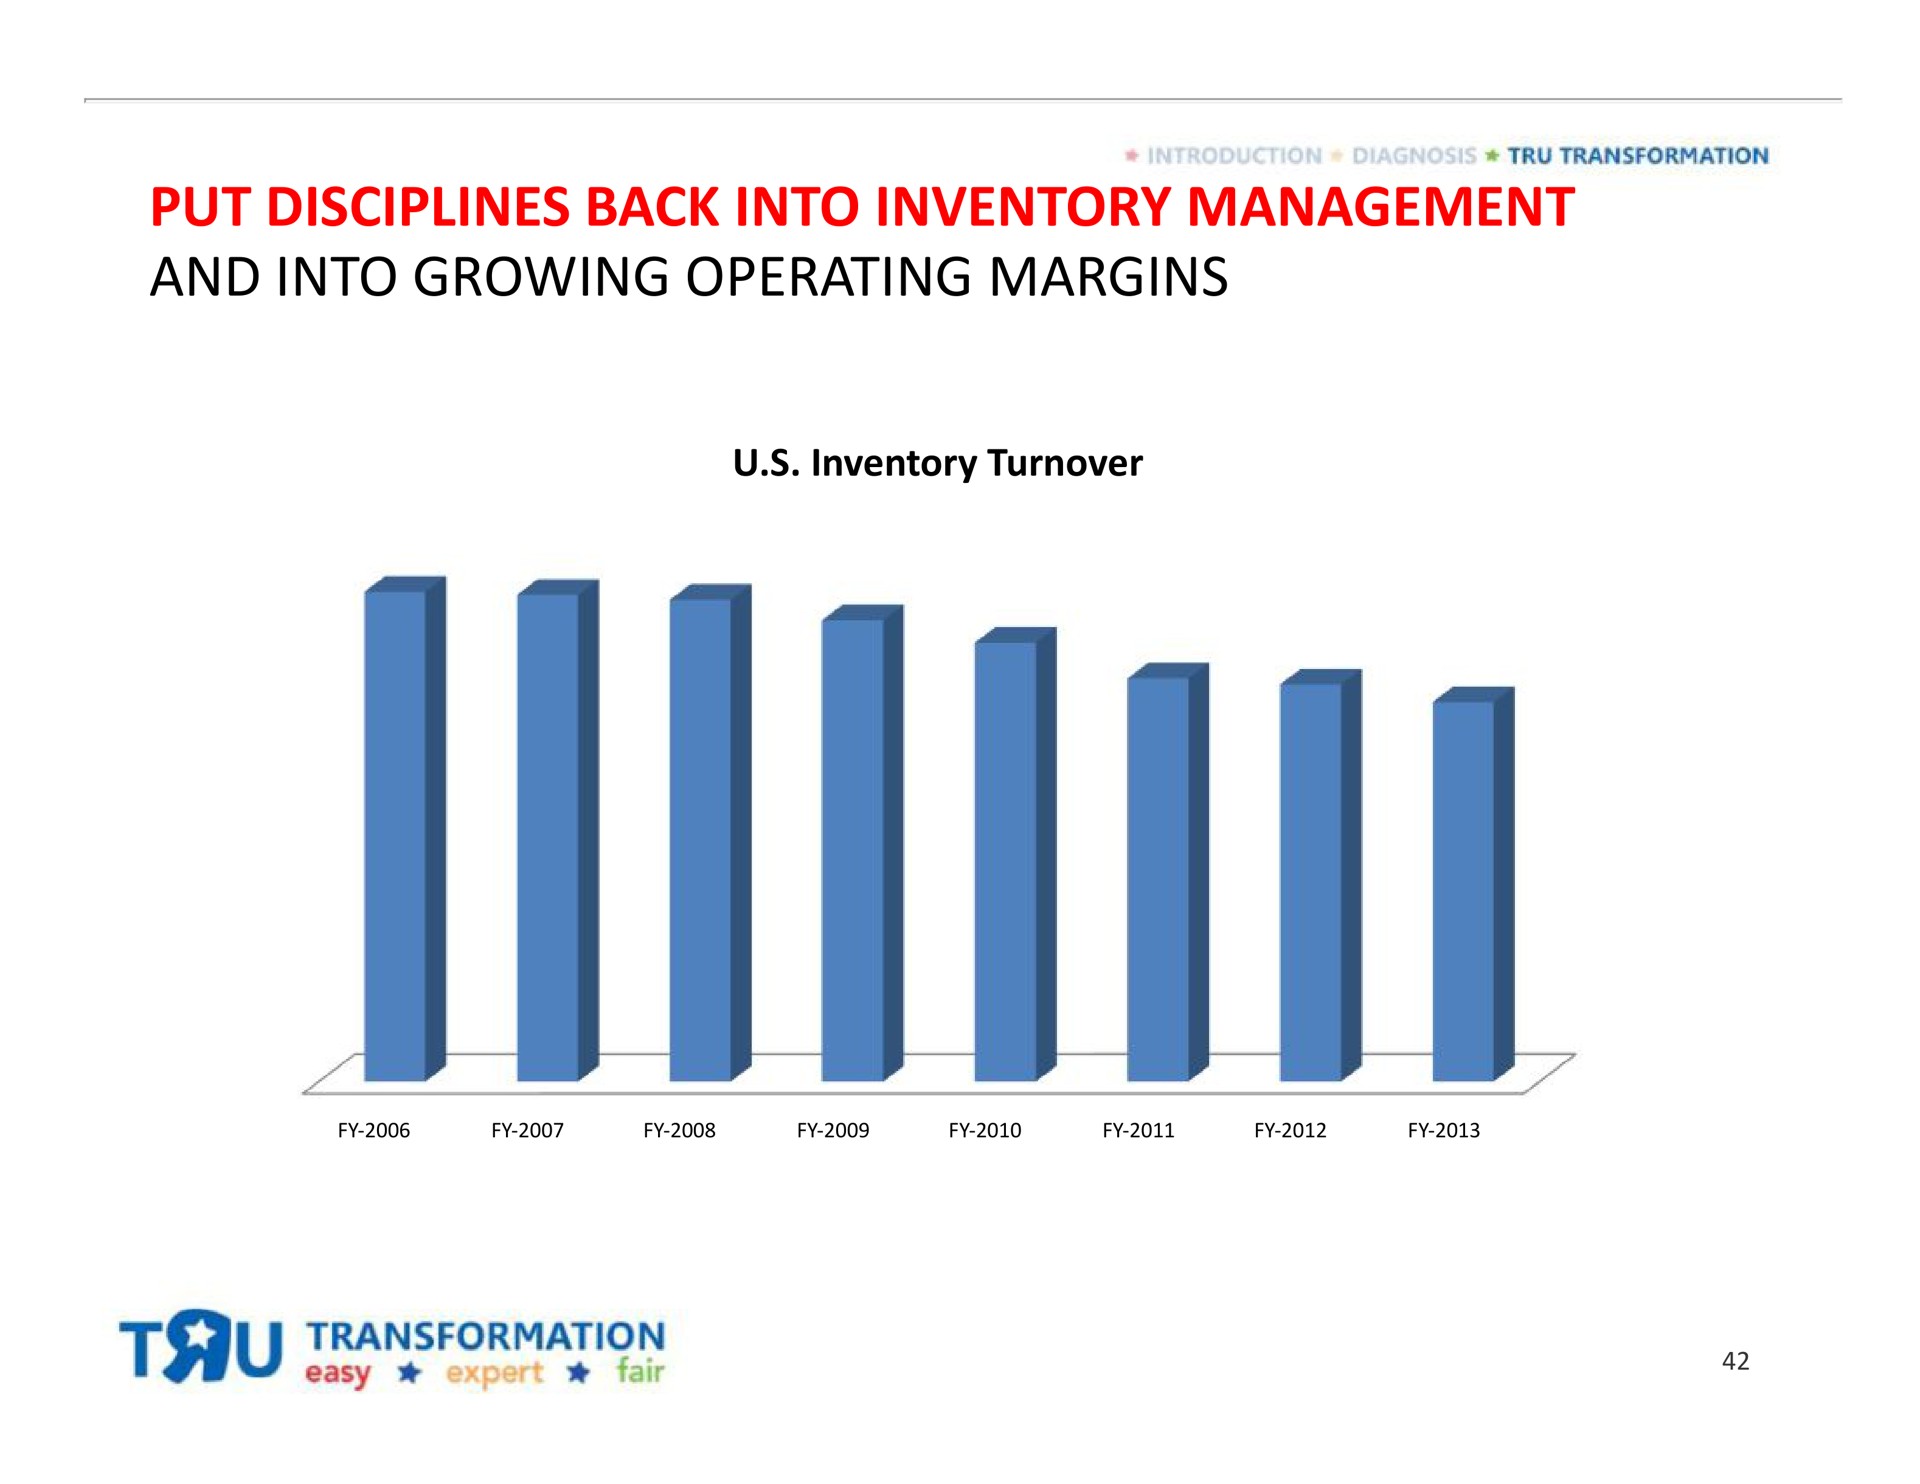 put disciplines back into inventory management and into growing operating margins | Toys R Us